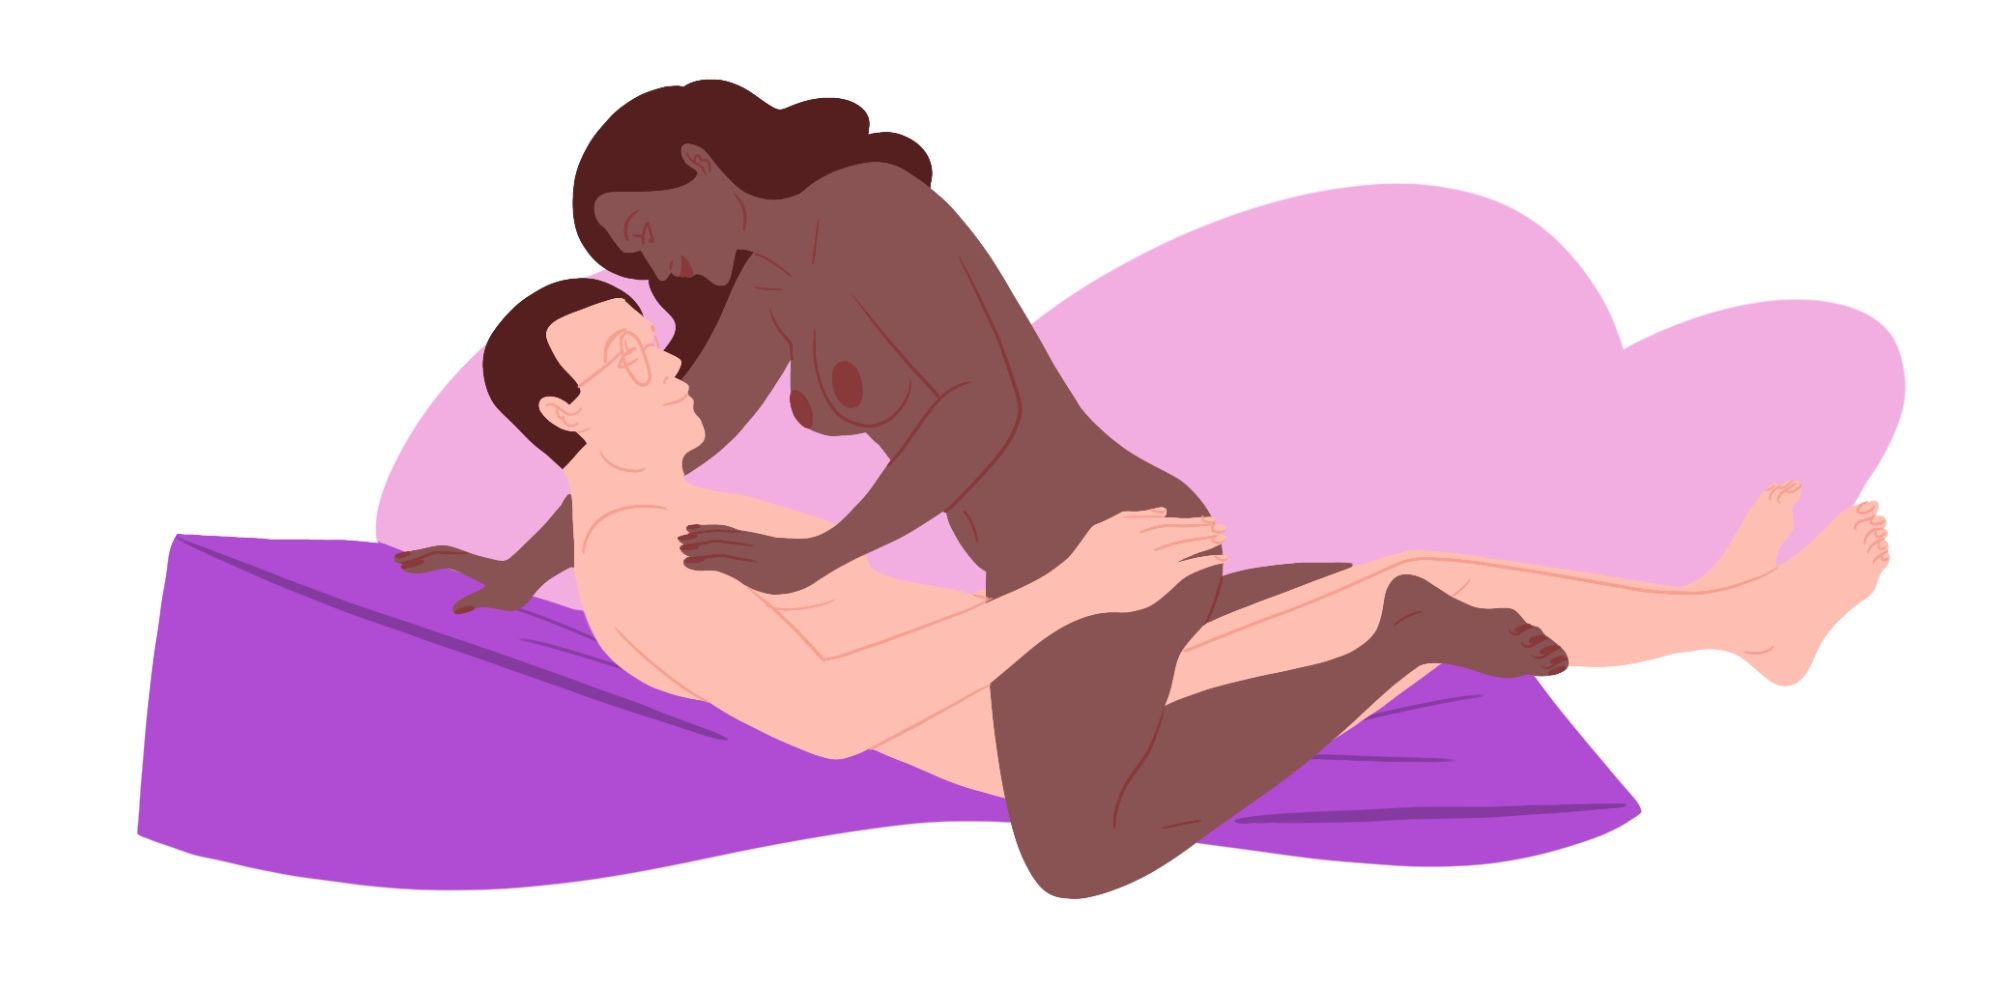 10 Cowgirl Sex Positions - How to Do the Cowgirl Sex Position